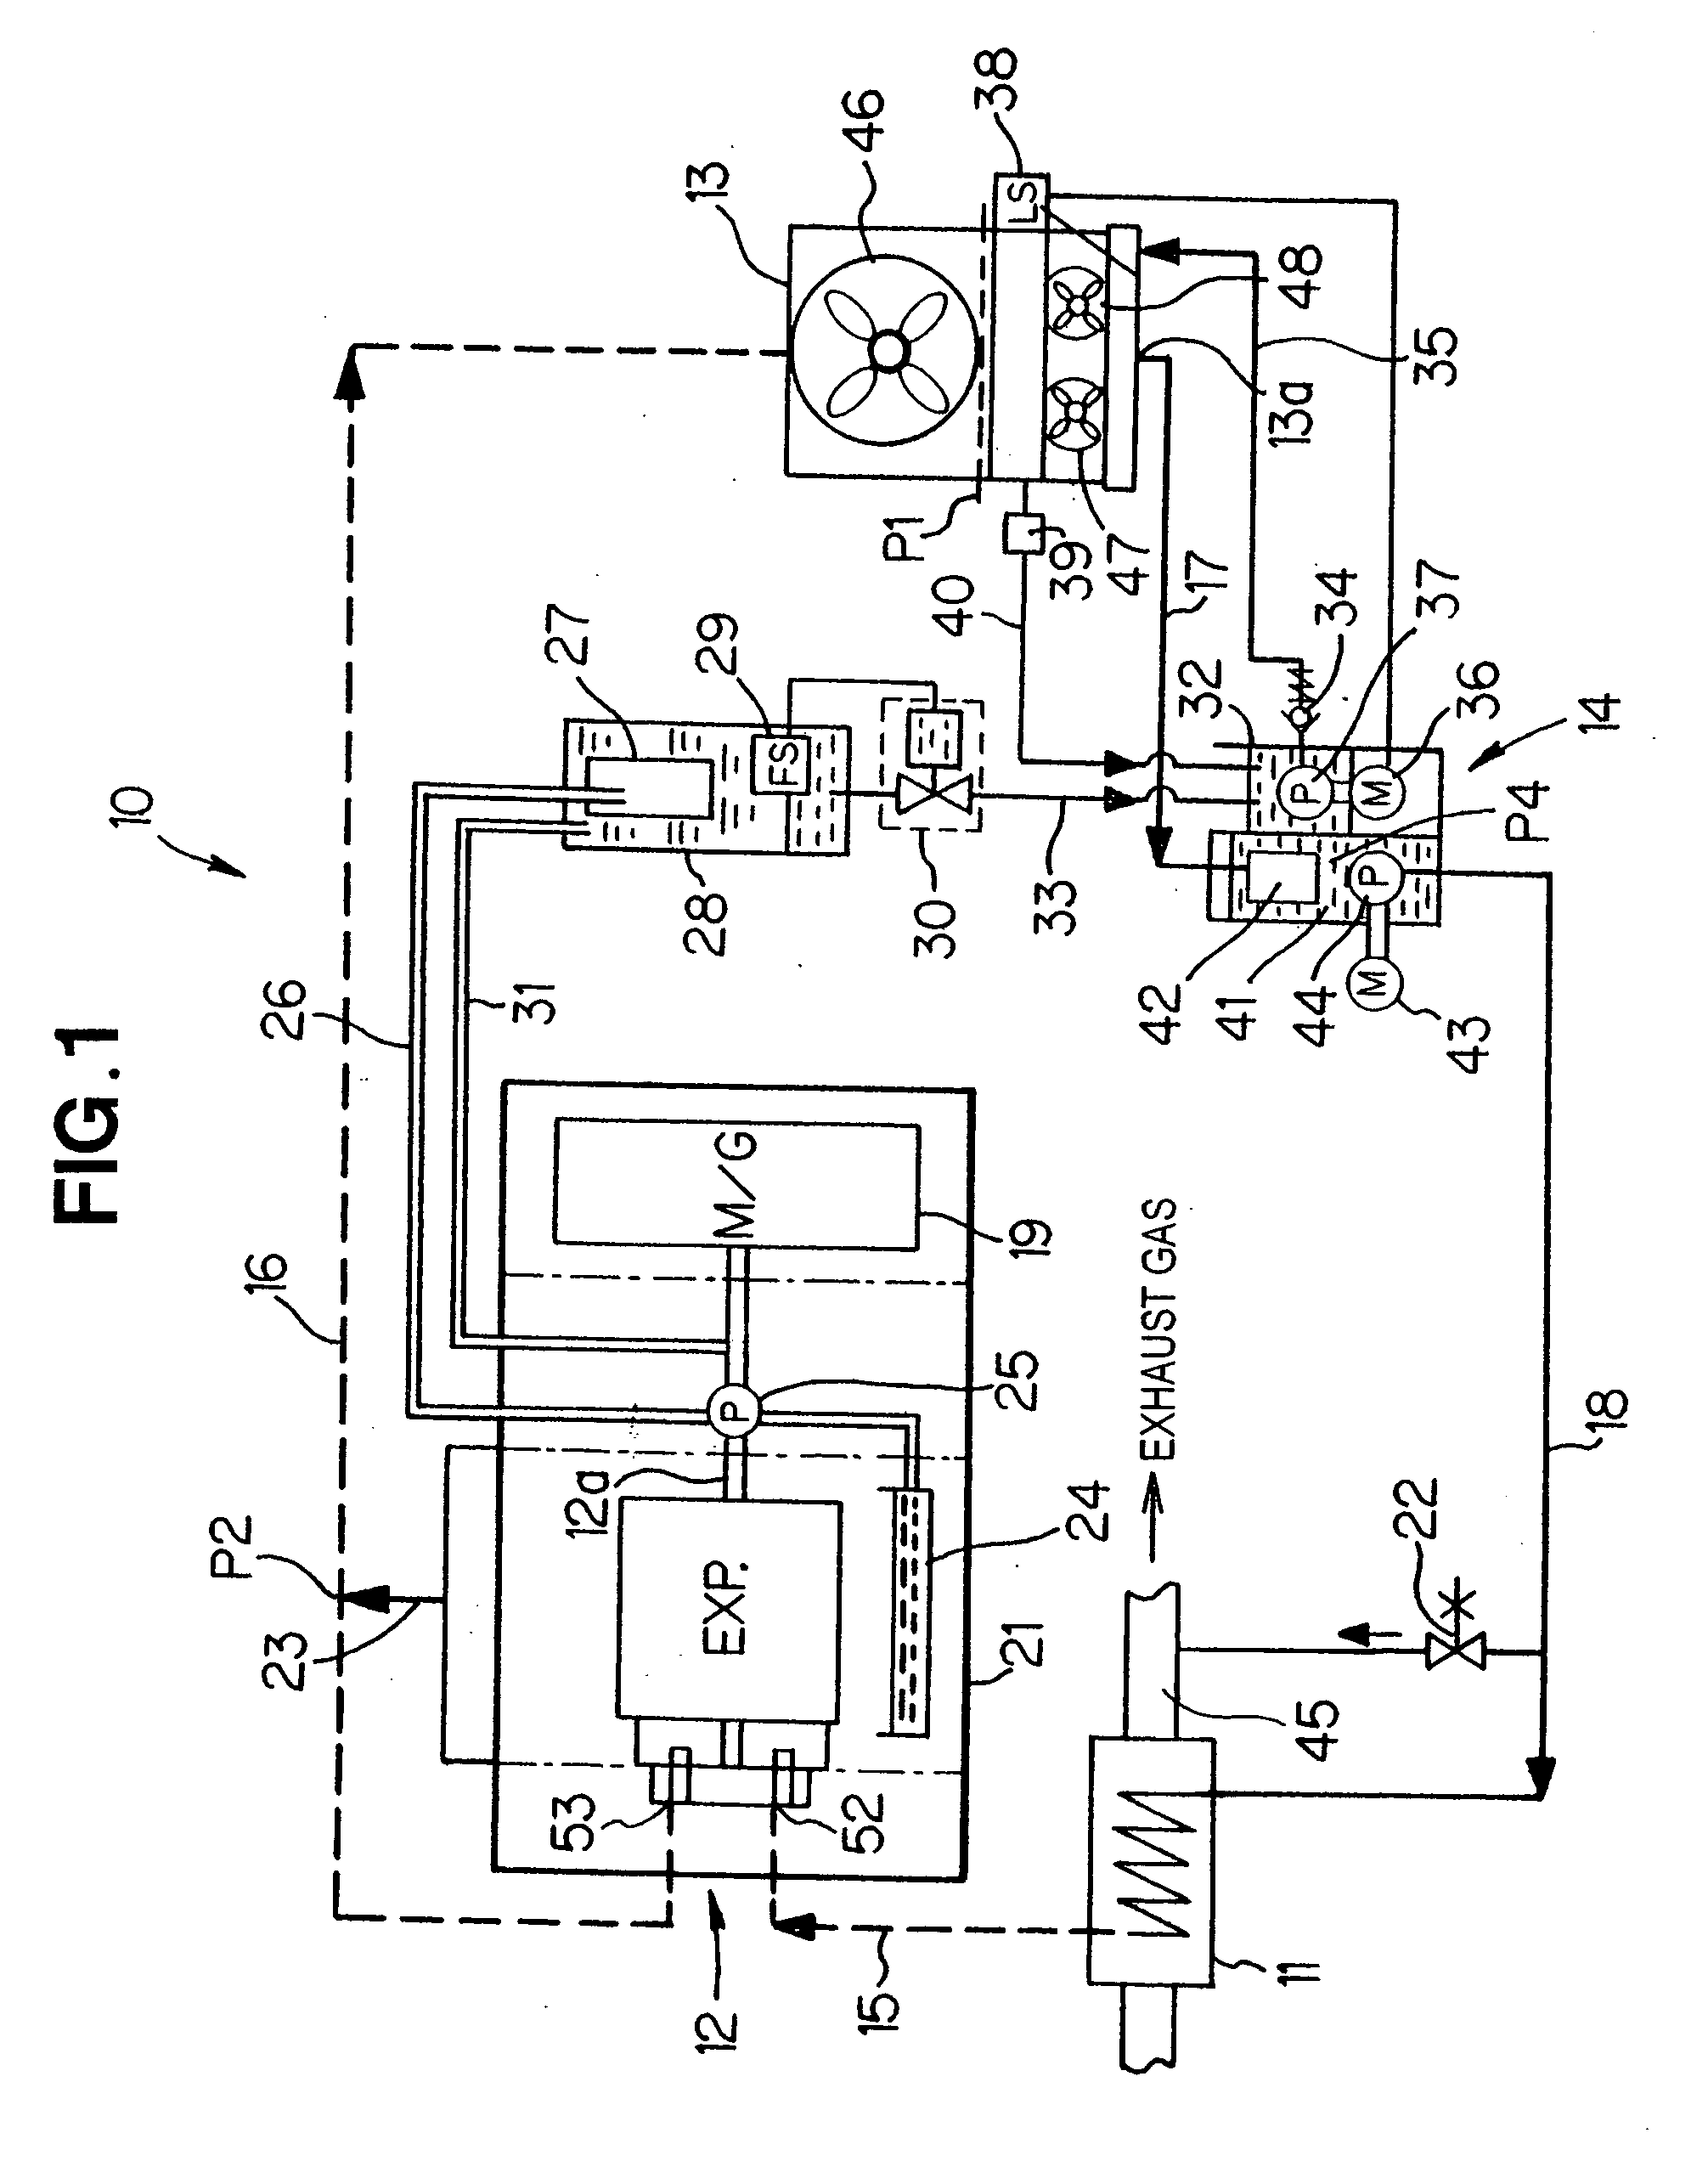 Device for controlling liquid level position within condenser in rankine cycle apparatus